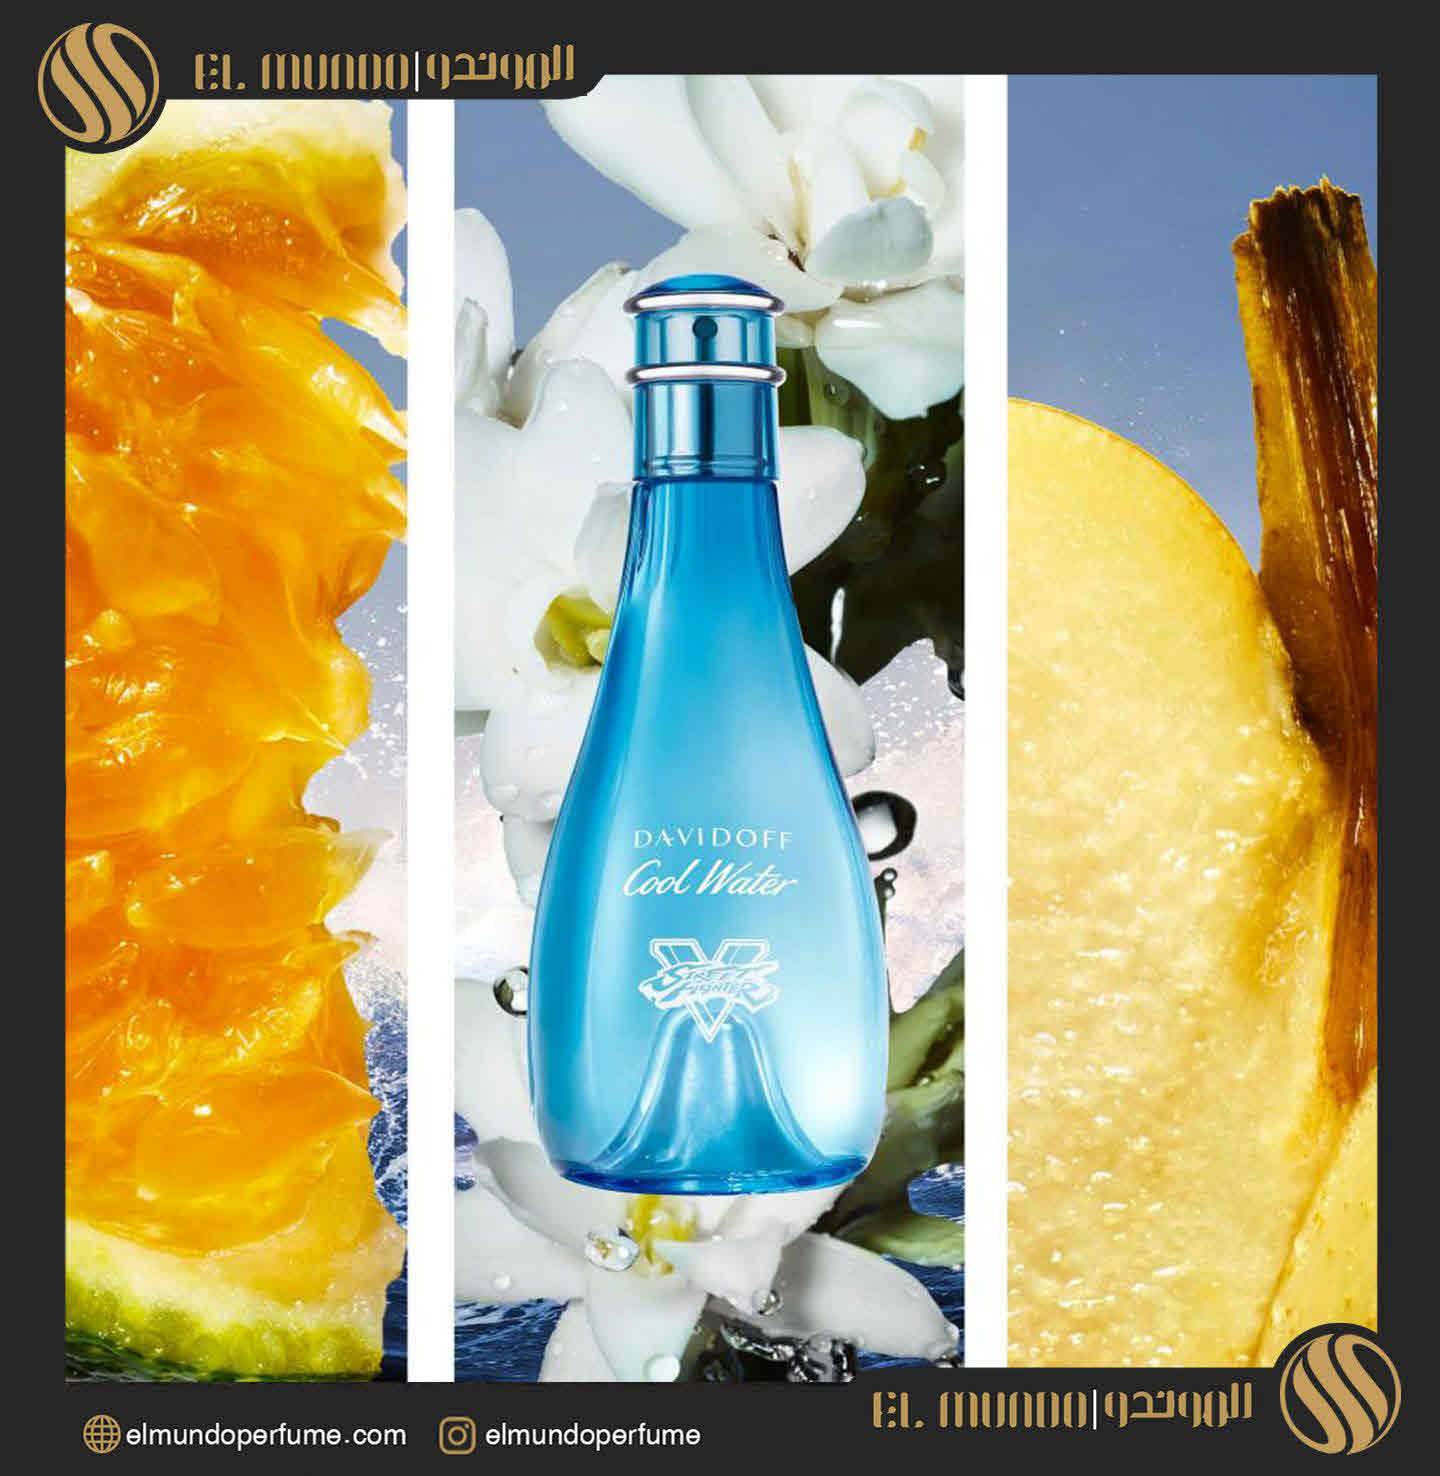 Cool Water Street Fighter Champion Summer Edition For Her Davidoff for women 2 - عطر زنانه دیویدوف کول واتر استریت فایتر چمپیون سامر ادیشن فور هر